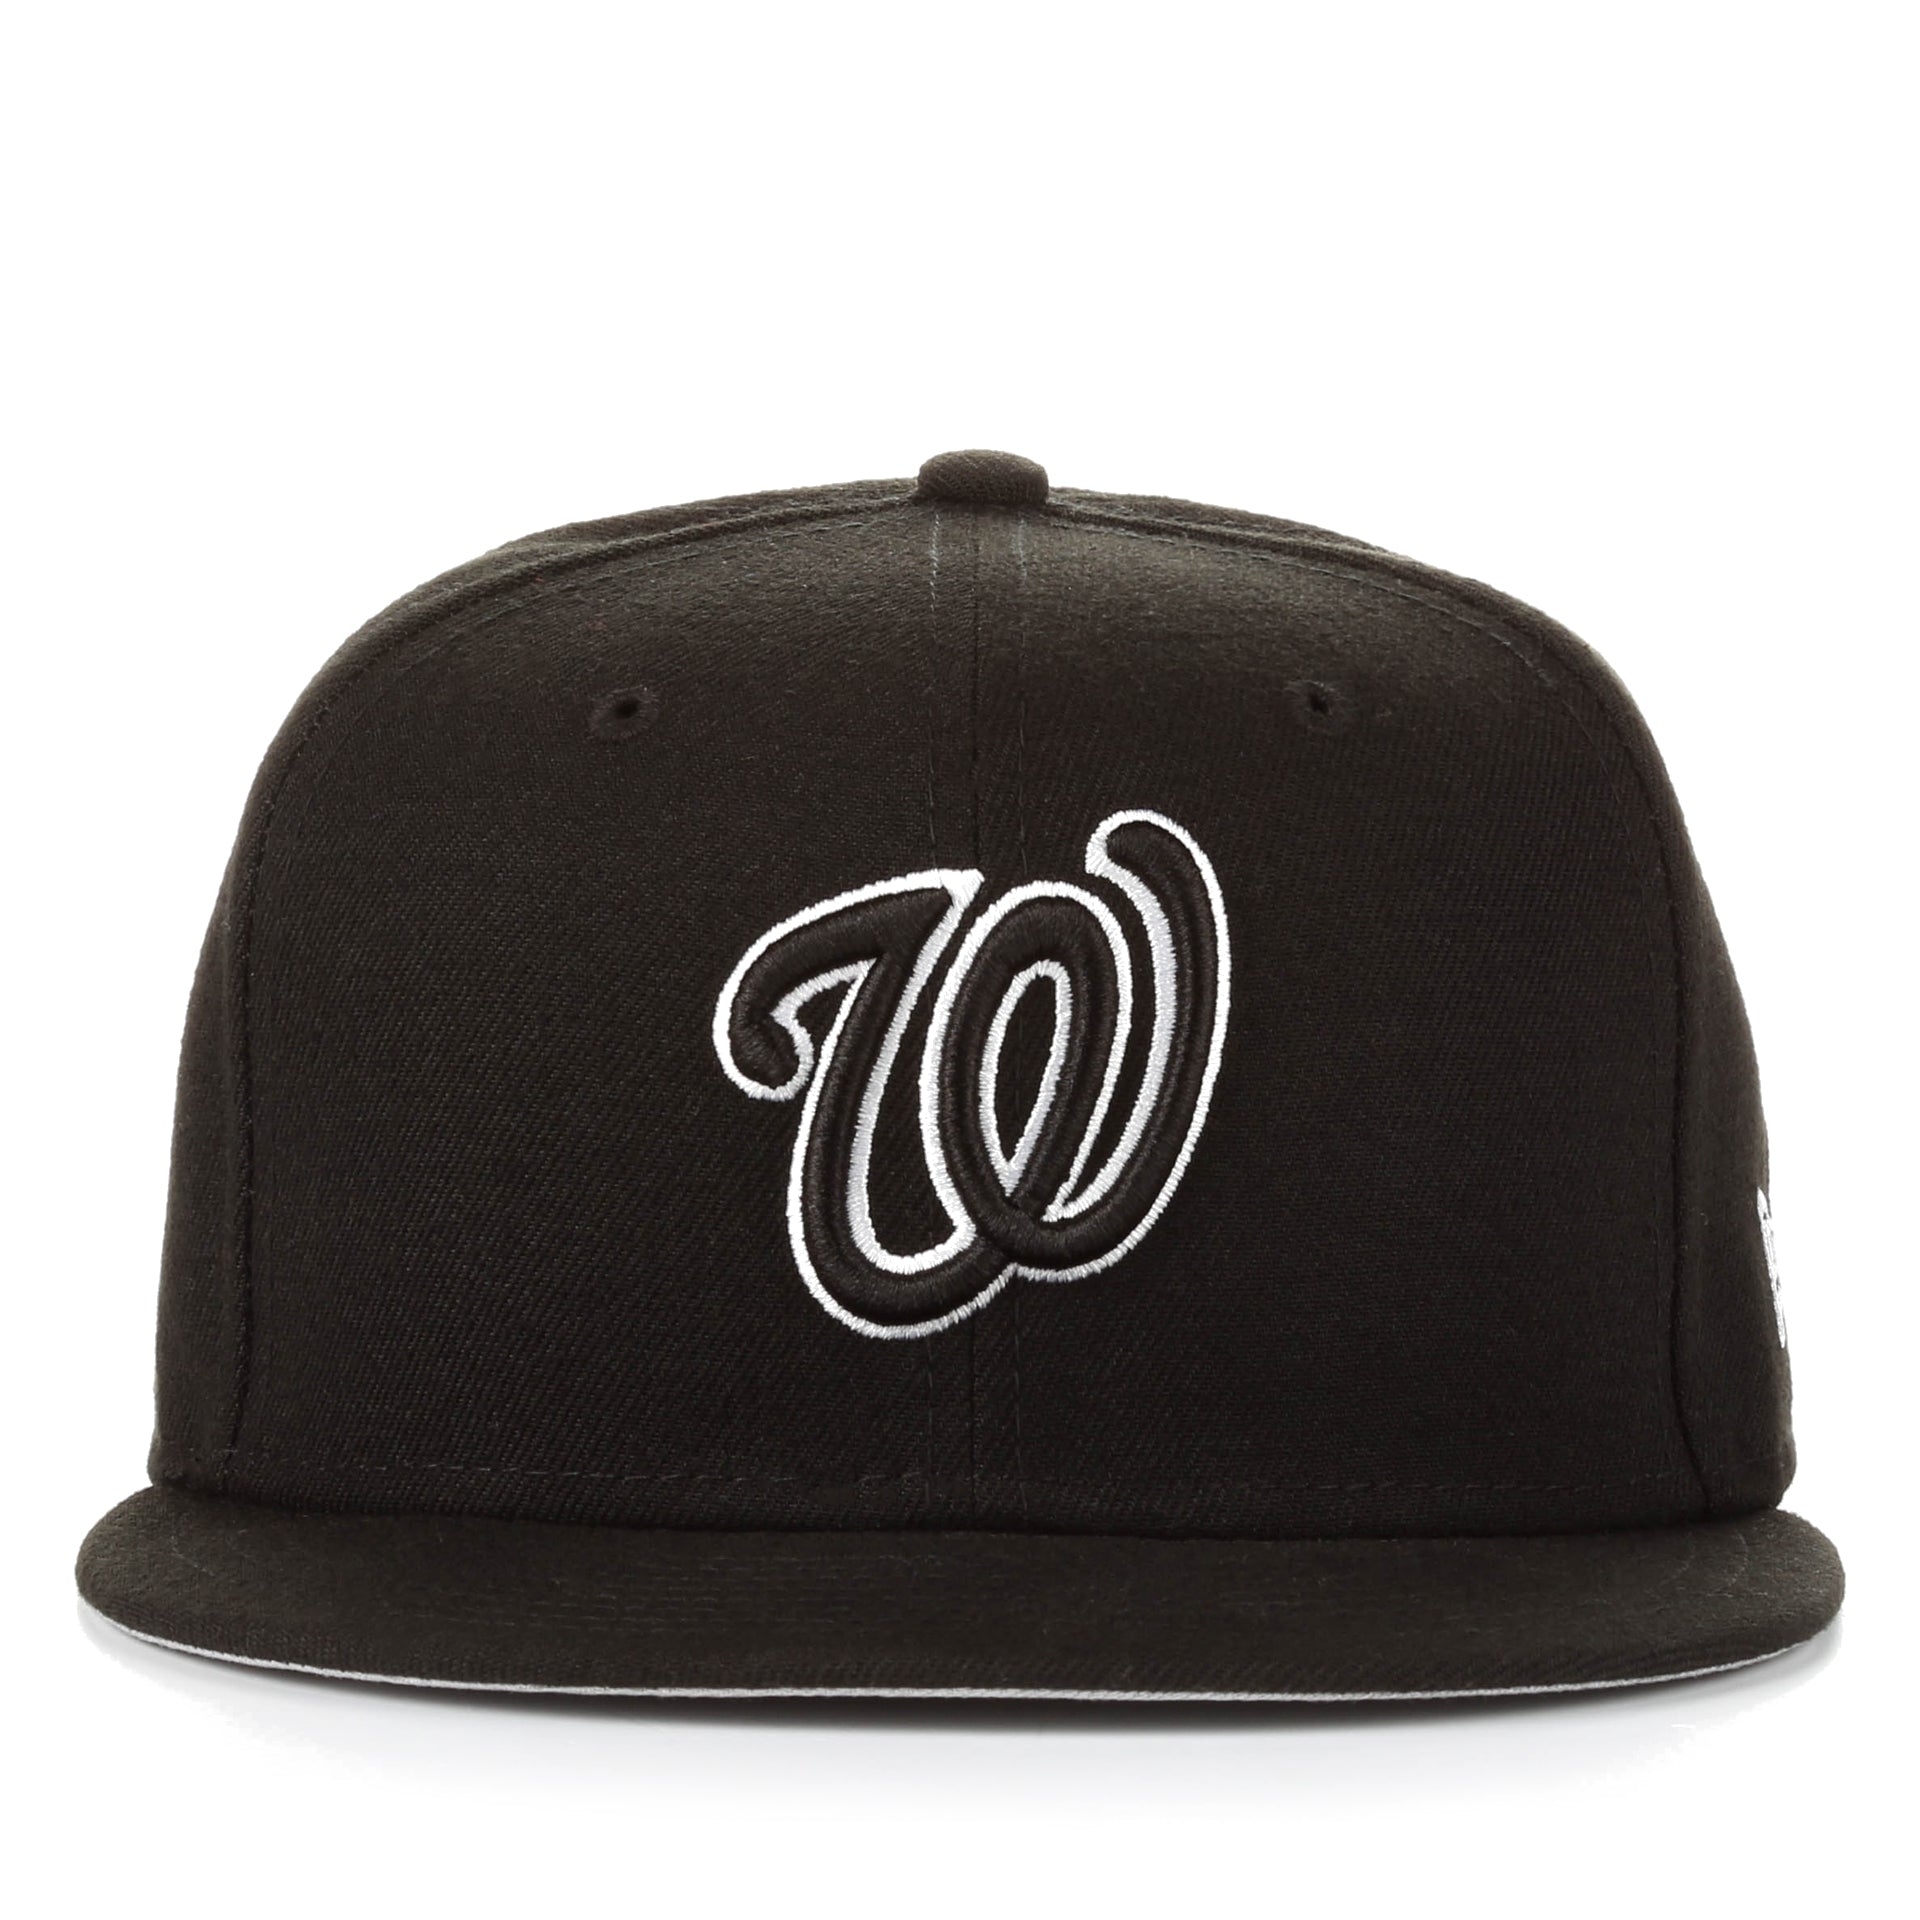 New Era 59Fifty League Basic Fitted Cap - Washington Nationals/Black - New  Star